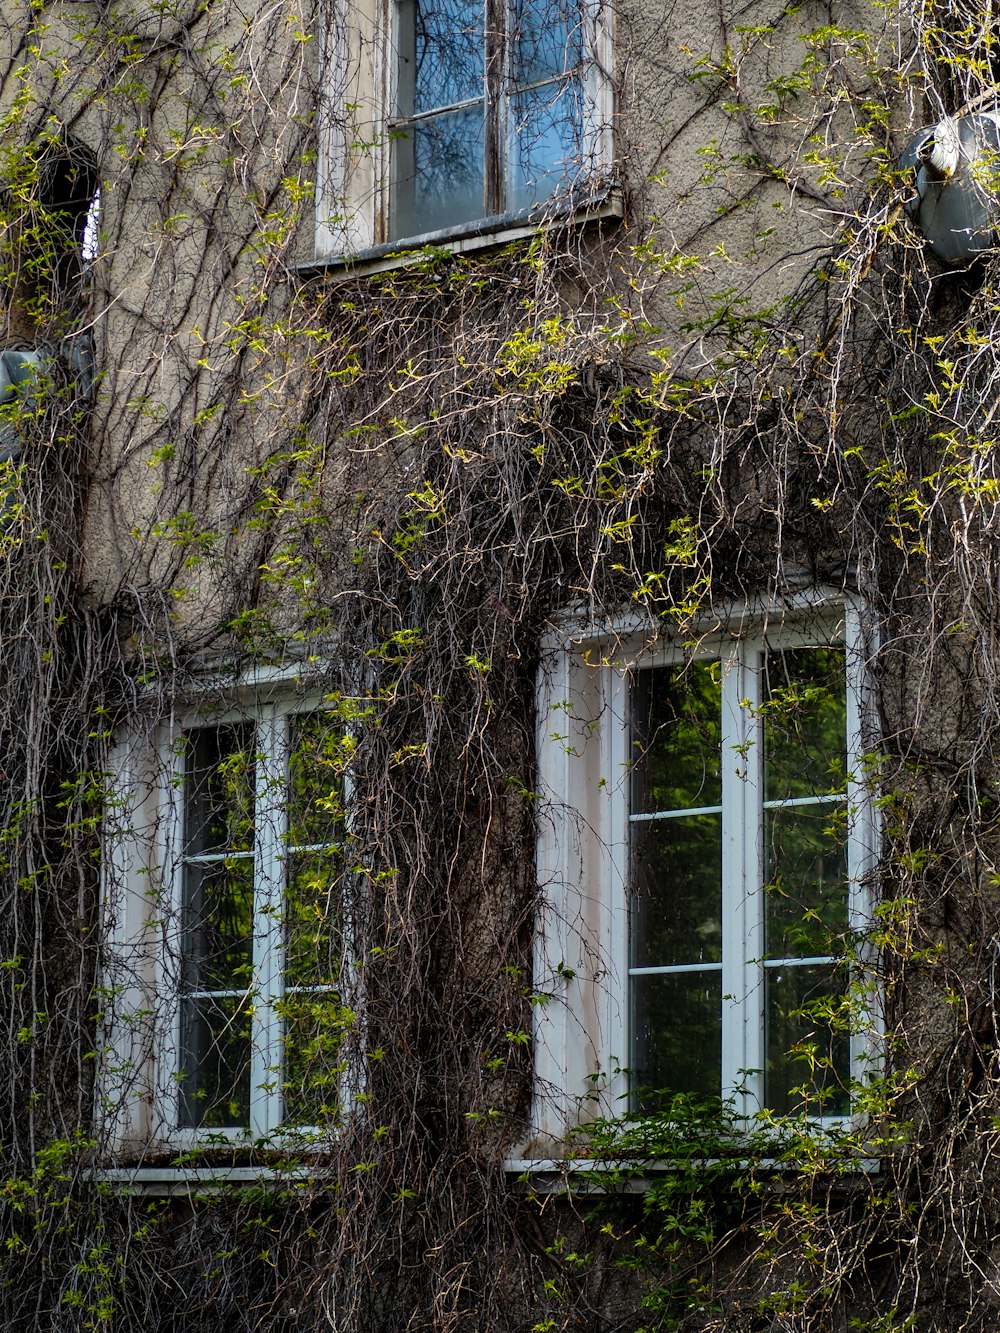 a building covered in vines and vines next to a window